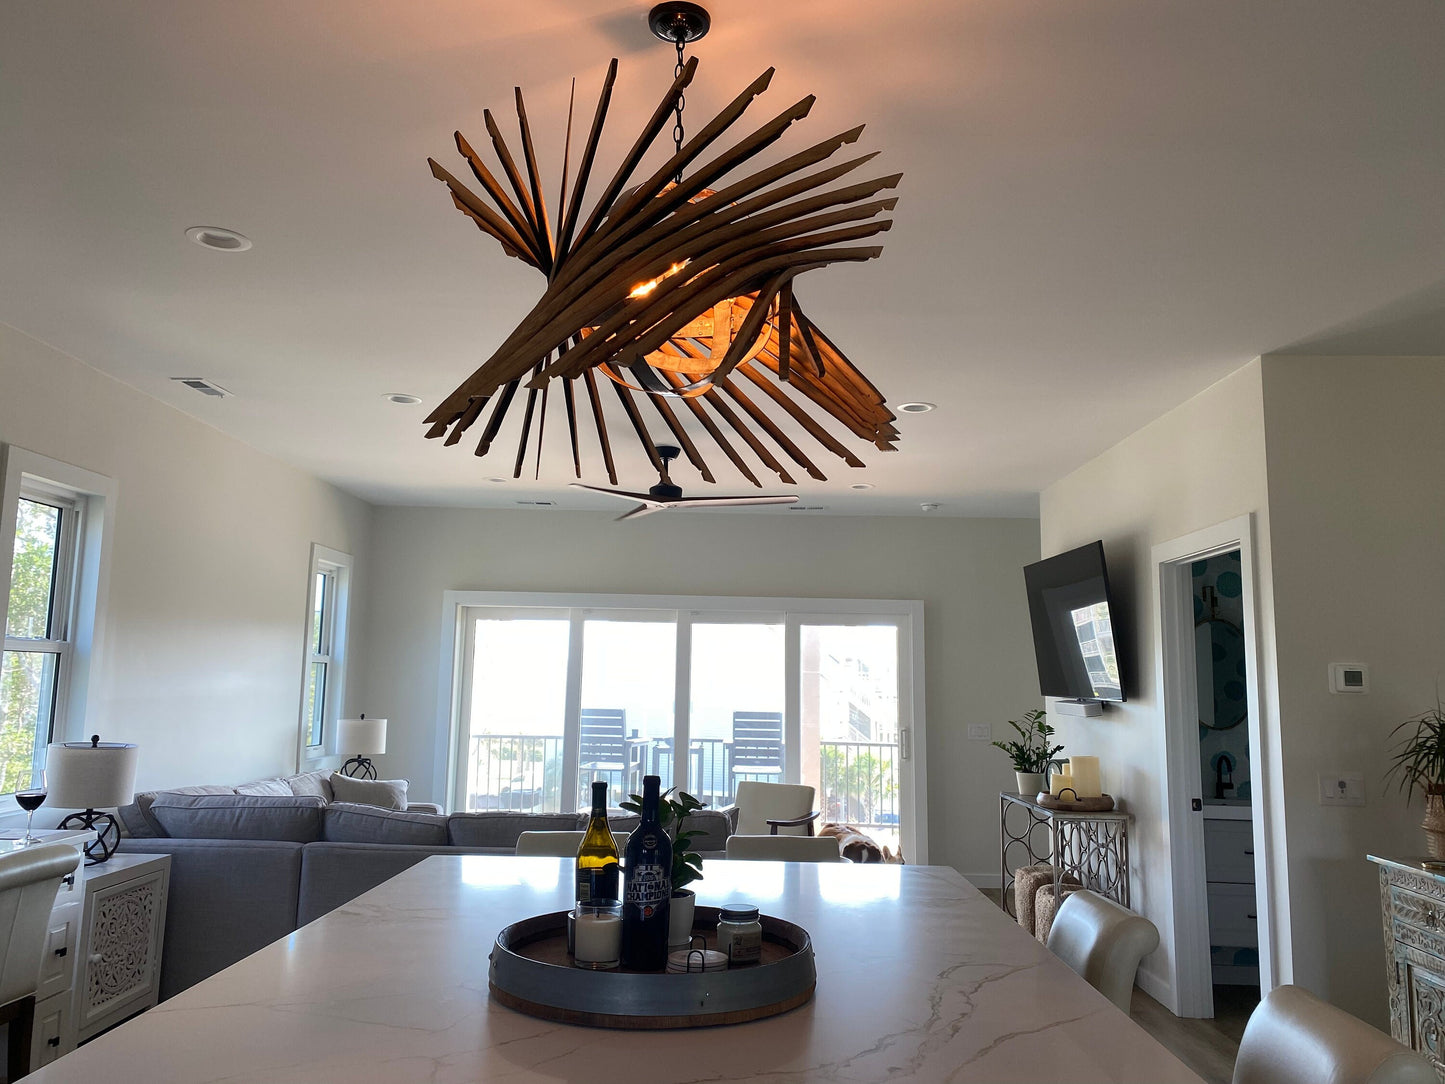 Wine Barrel Chandelier - Helicoid - made from retired California wine barrels. 100% Recycled!